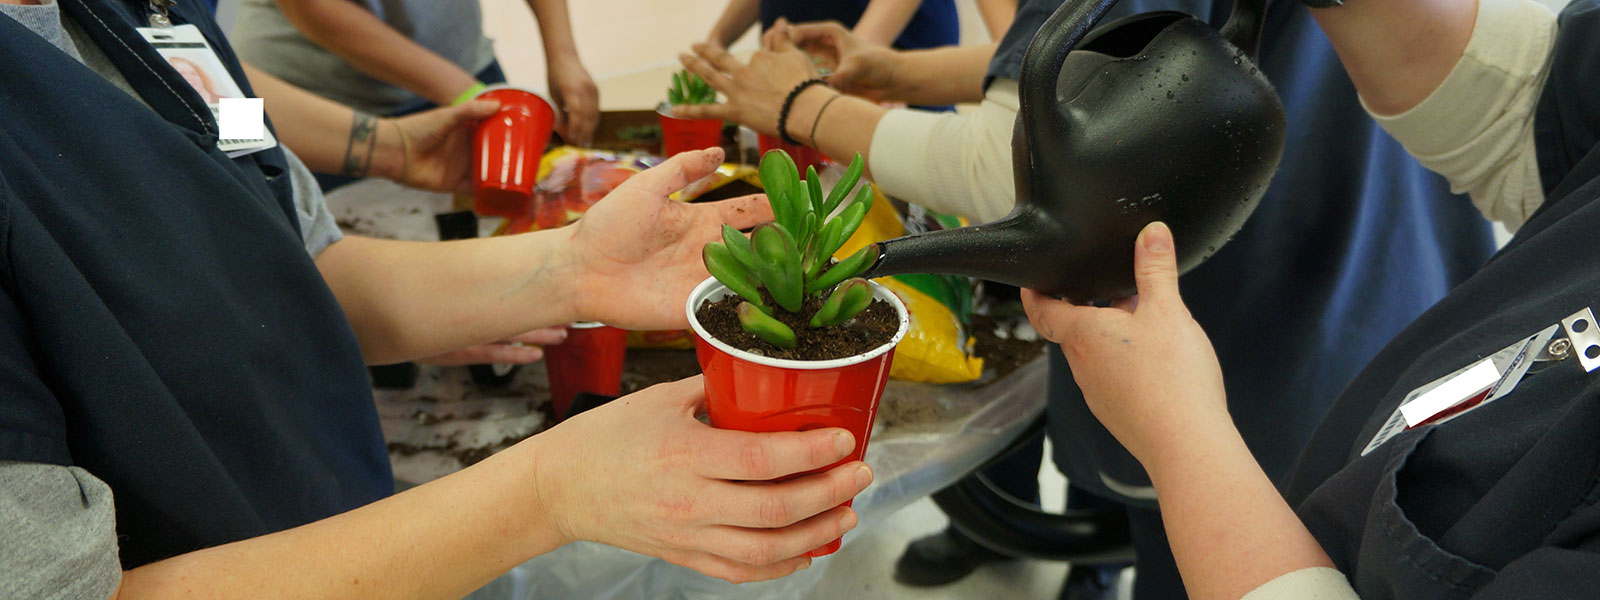 Hands holding a small potted plant.